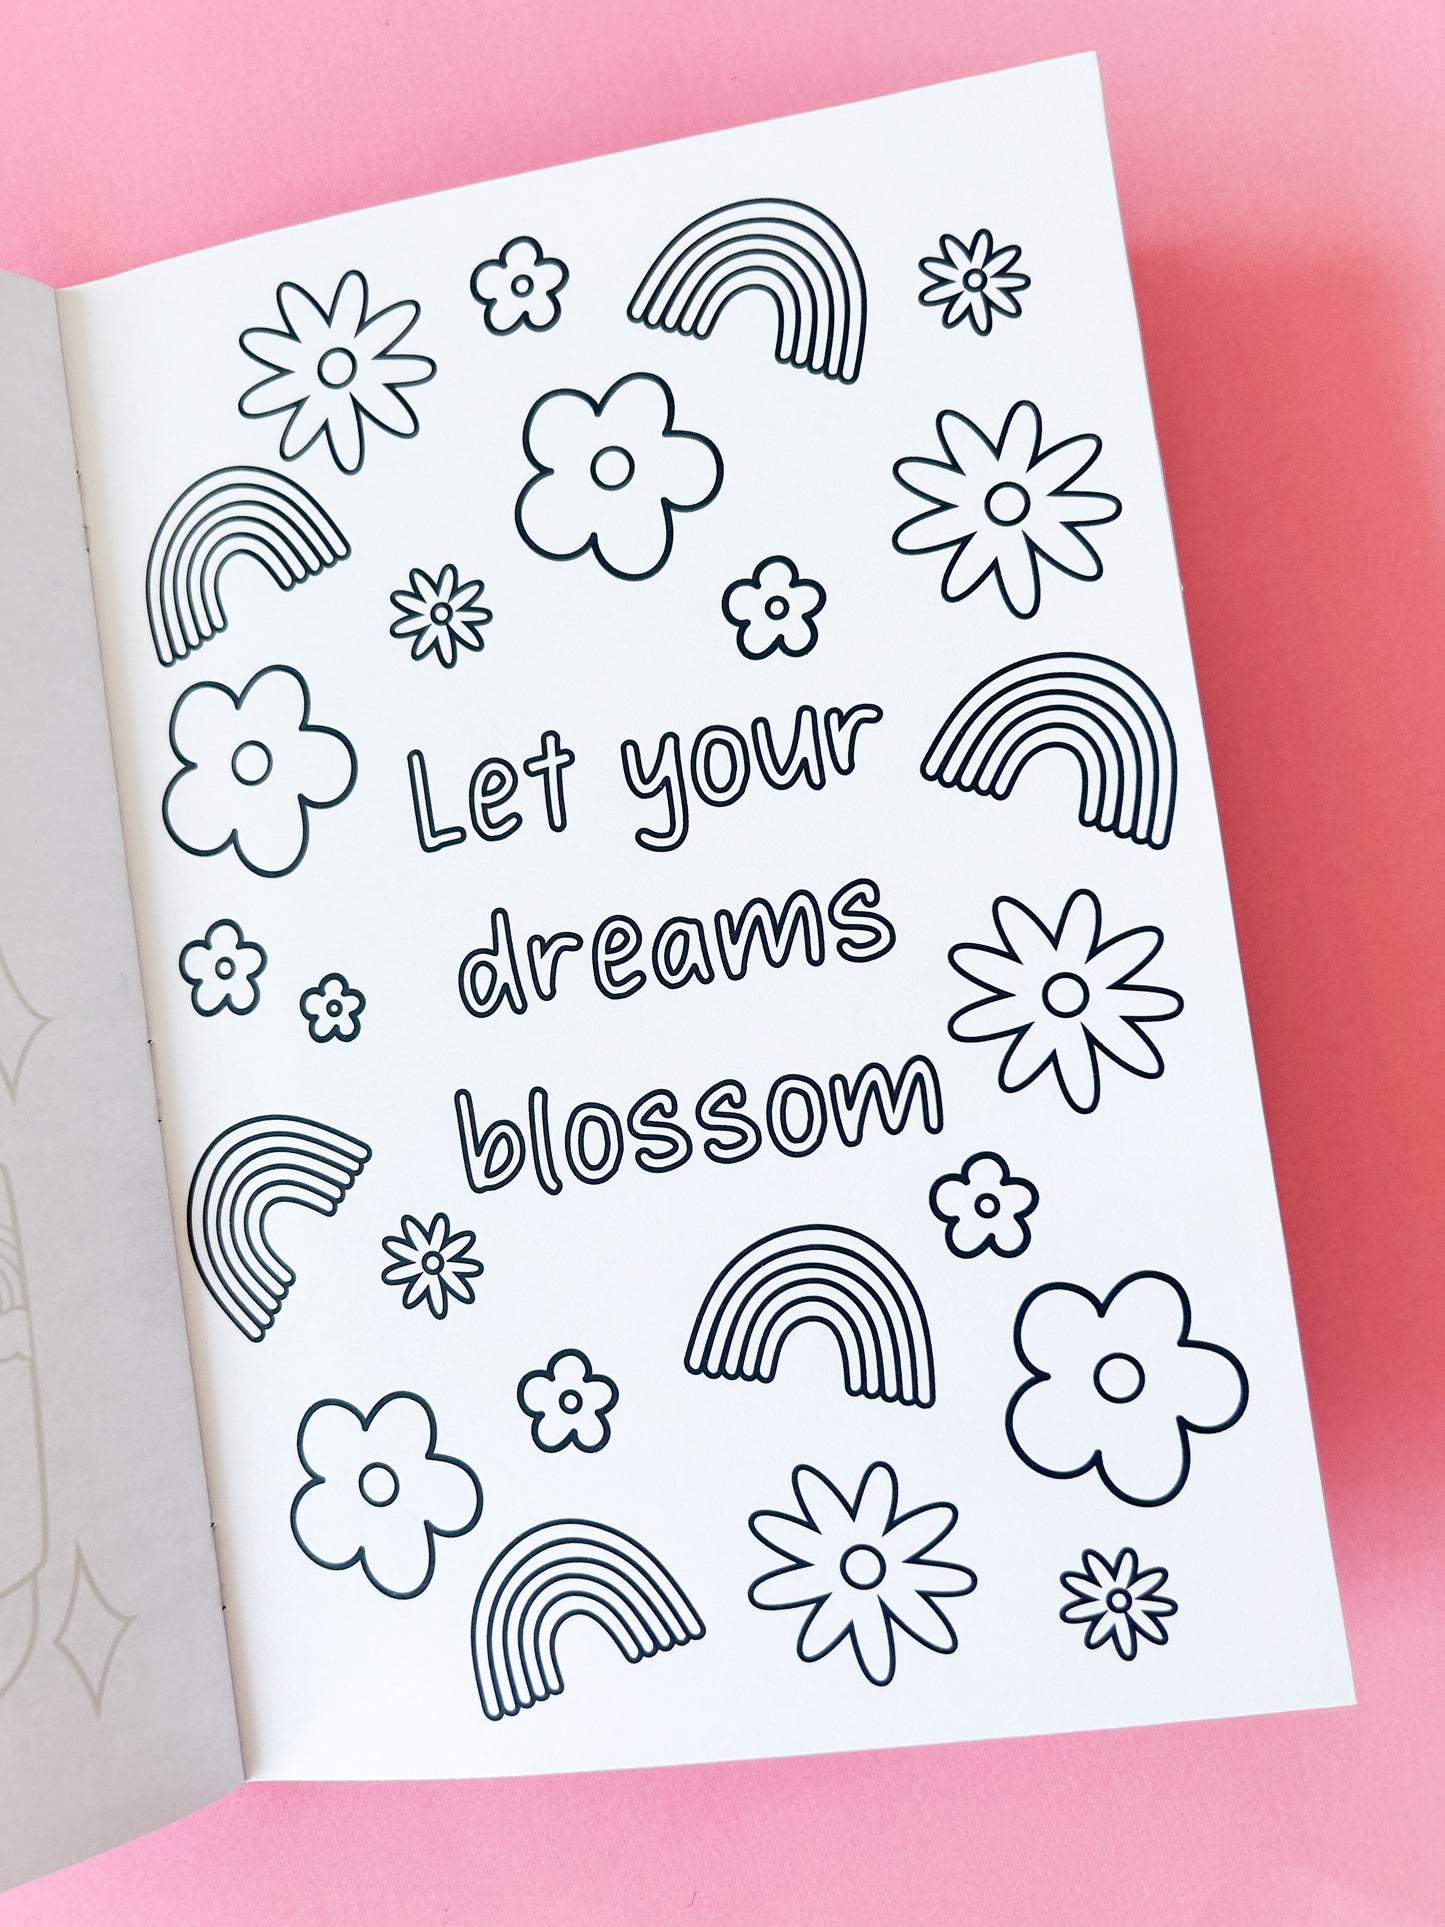 Super Second - Happiness Affirmations Colouring book